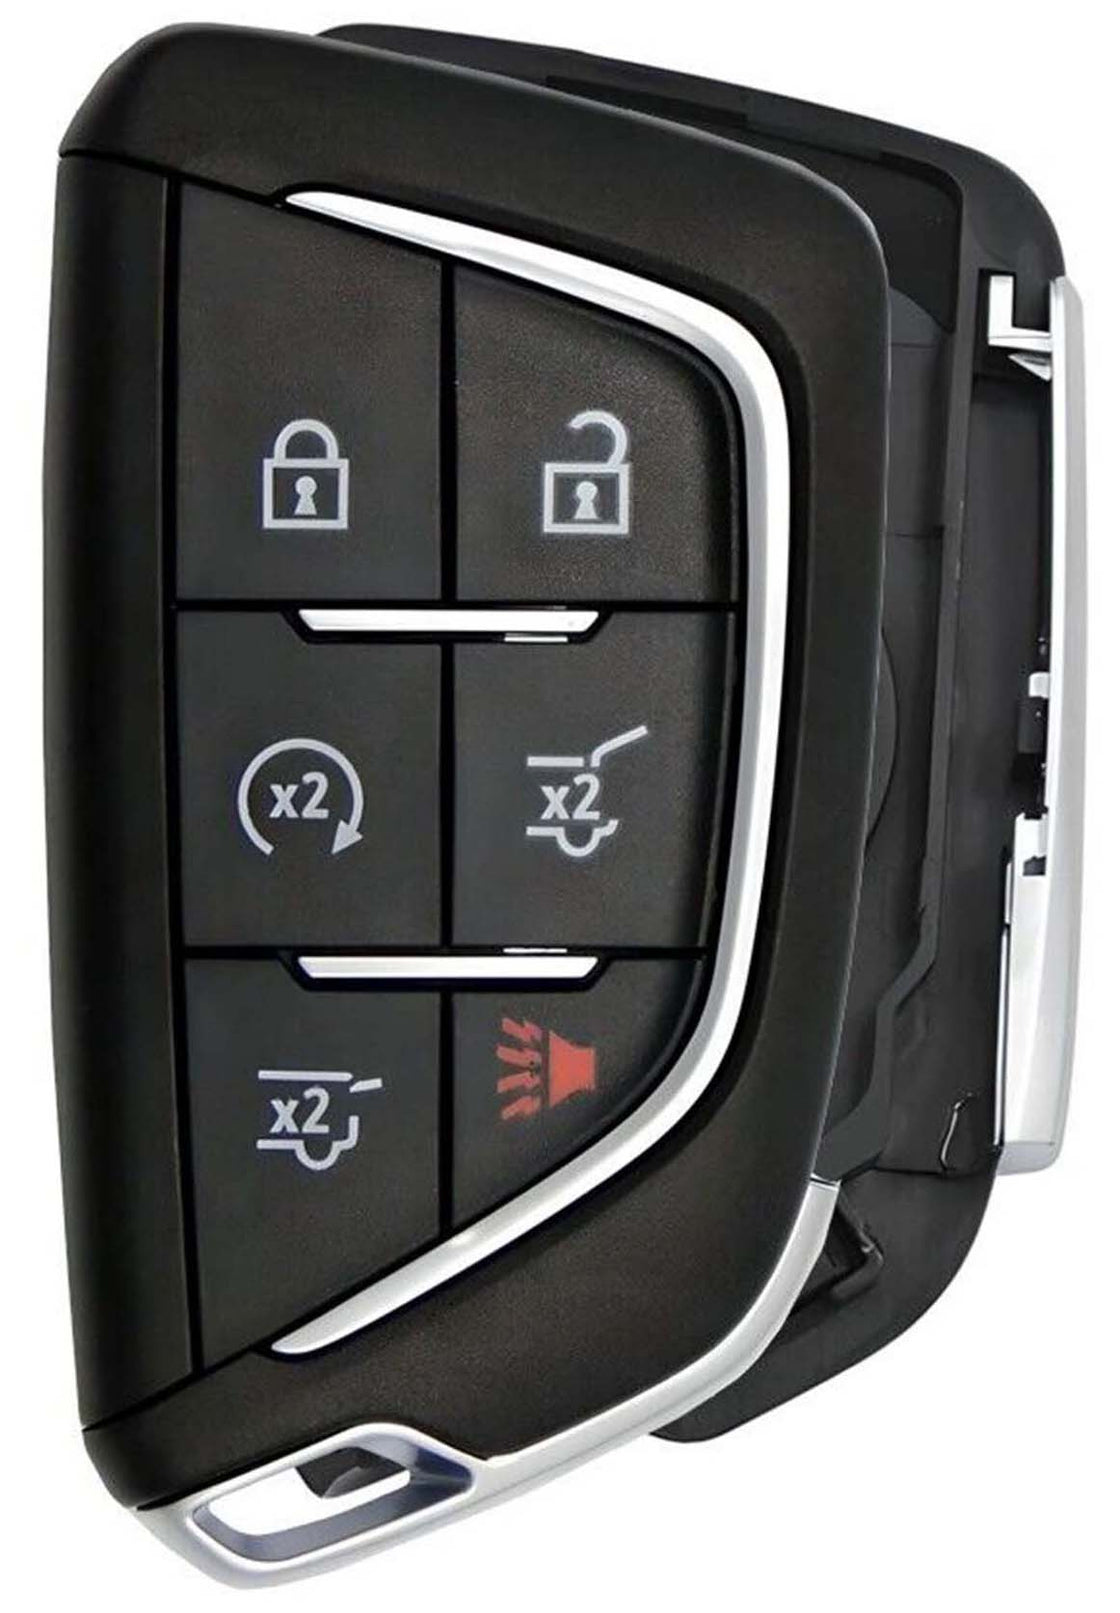 1x New Proximity Key Fob SHELL / CASE Compatible with & fit for Select Cadillac Escalade Vehicles - YG0G20TB1-04 - (No Electronics or Chip Inside)